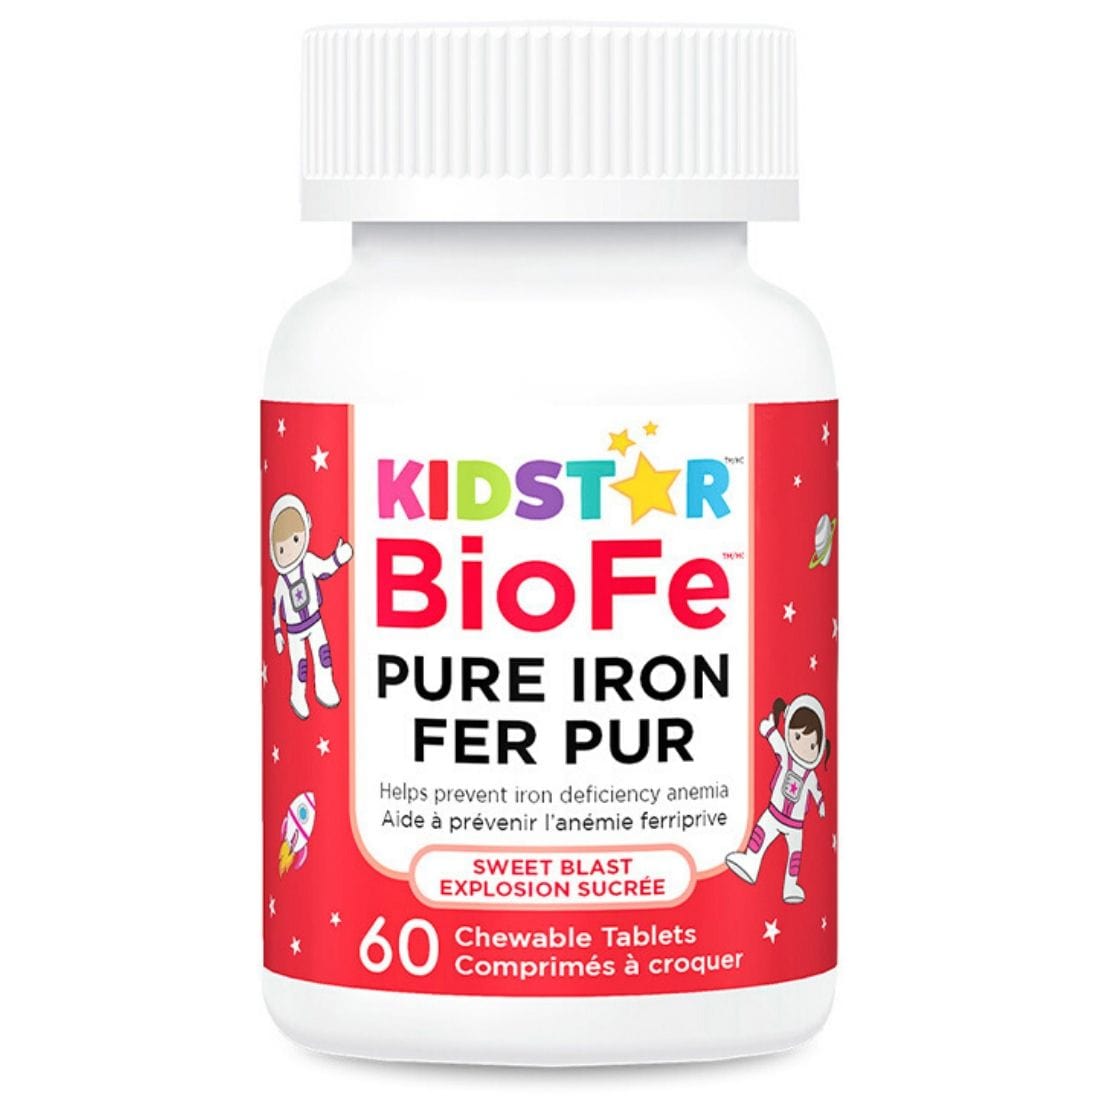 KidStar BioFe Pure Chewable Iron For Kids, 5mg Iron per Chewable